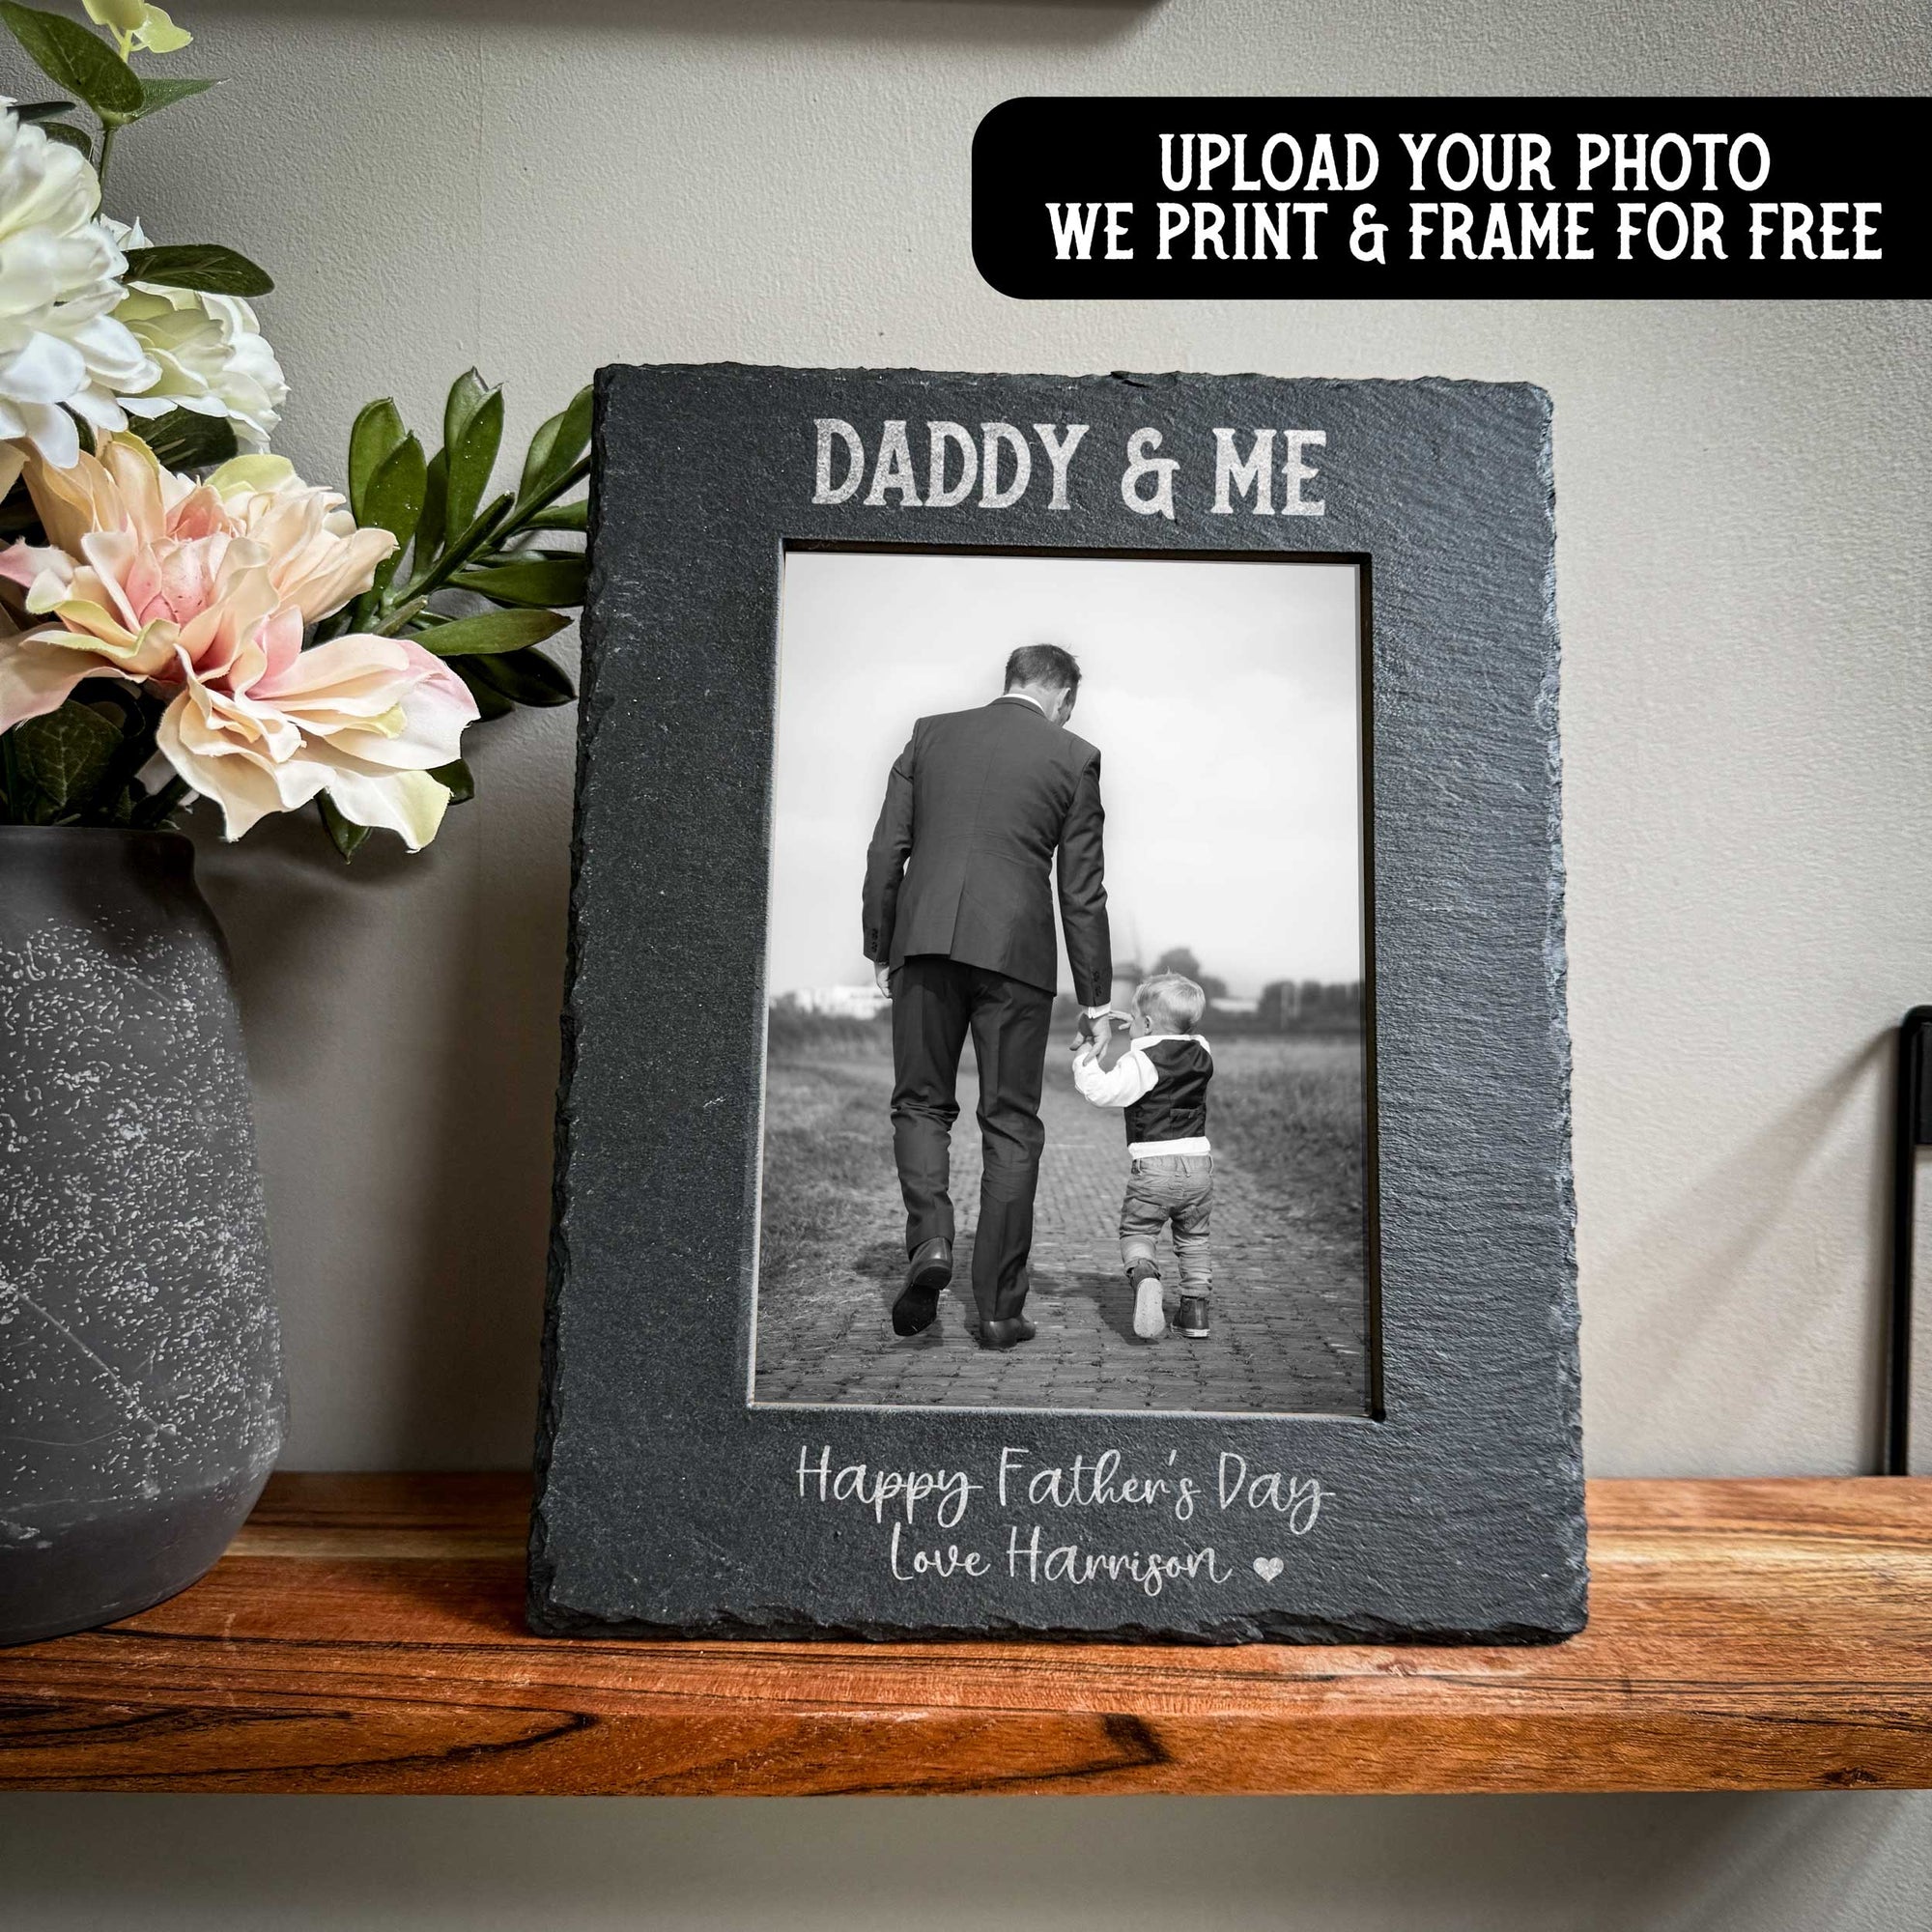 Daddy & Me Personalised Slate Photo Frame